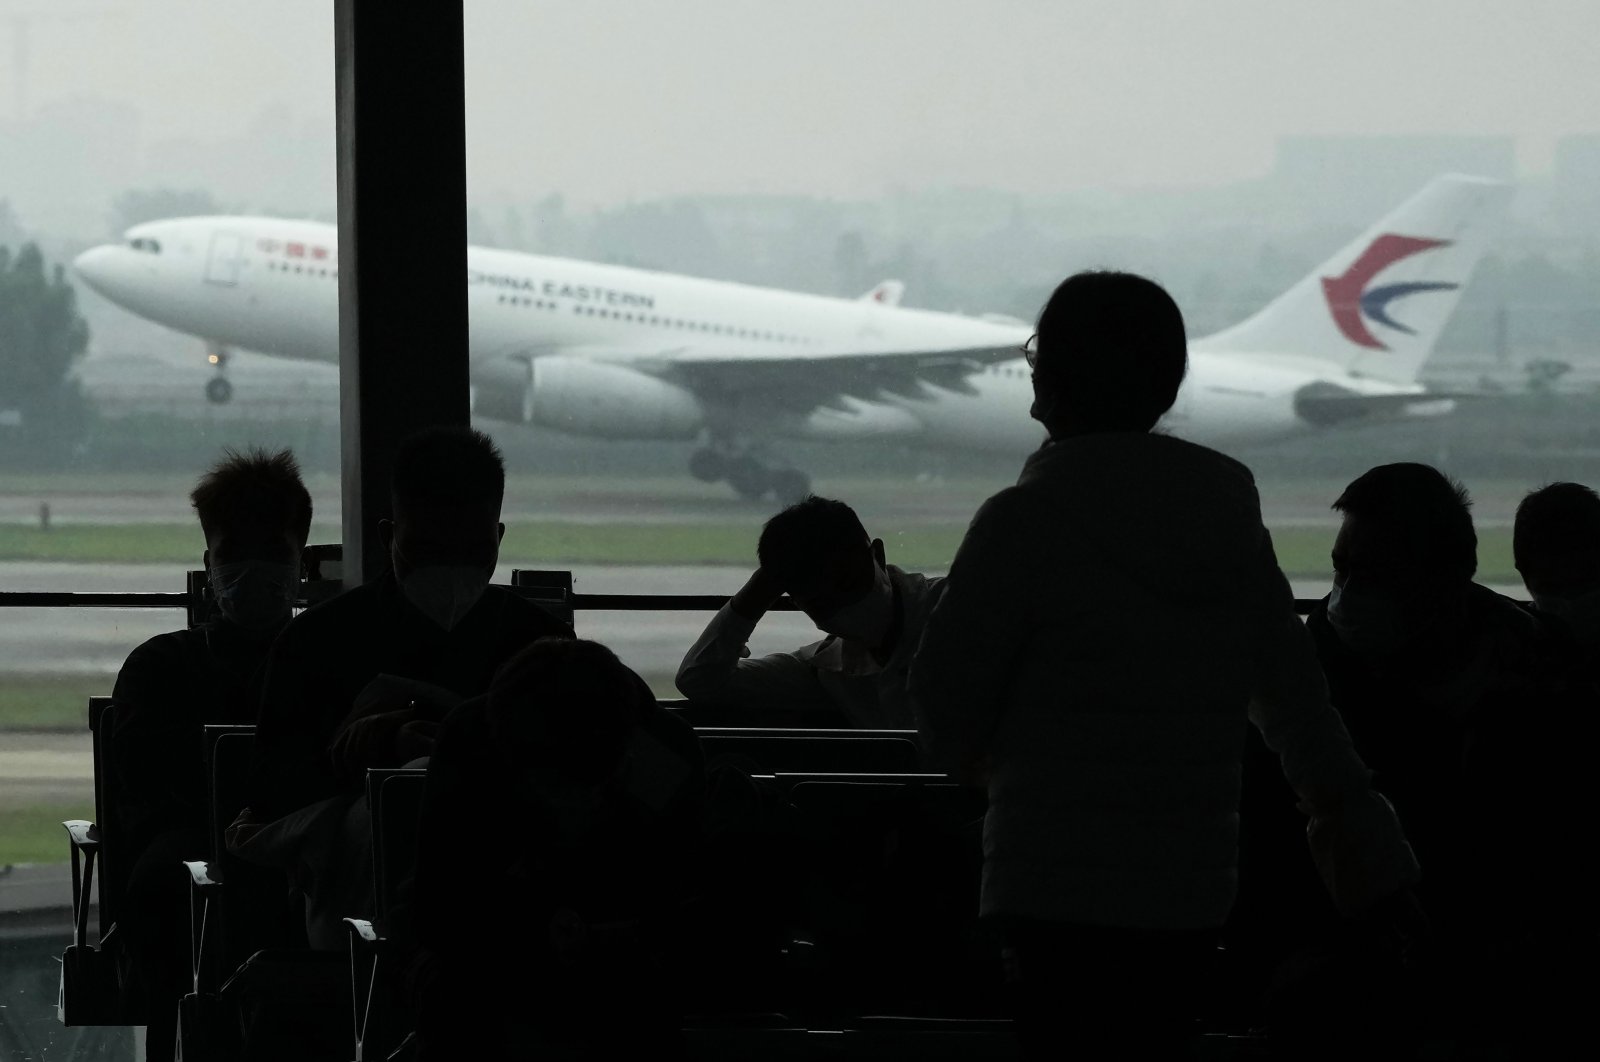 Passengers wait for their flight as a China Eastern flight takes off from the runway of Baiyun Airport on March 25, 2022, in southern Guangzhou province, China. (AP Photo)